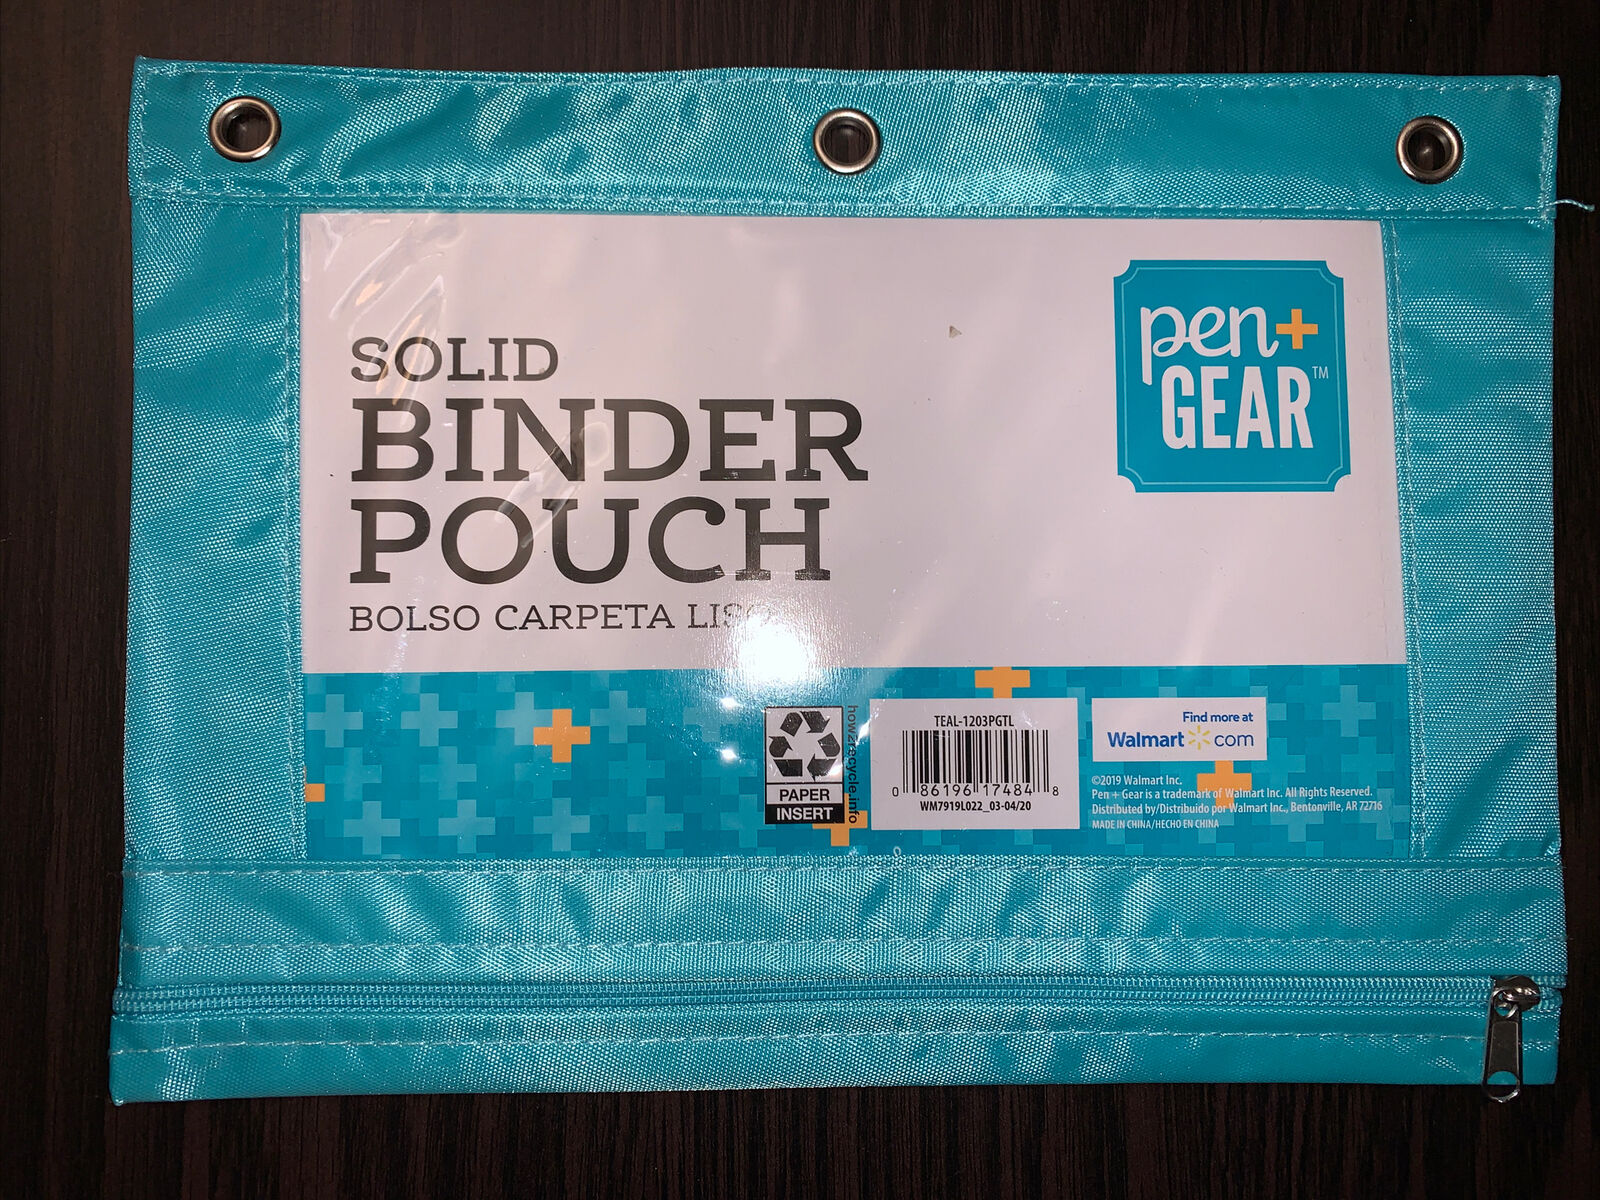 Solid Binder Pouch Pen+ Gear 3 Ring With Zipper Teal Color